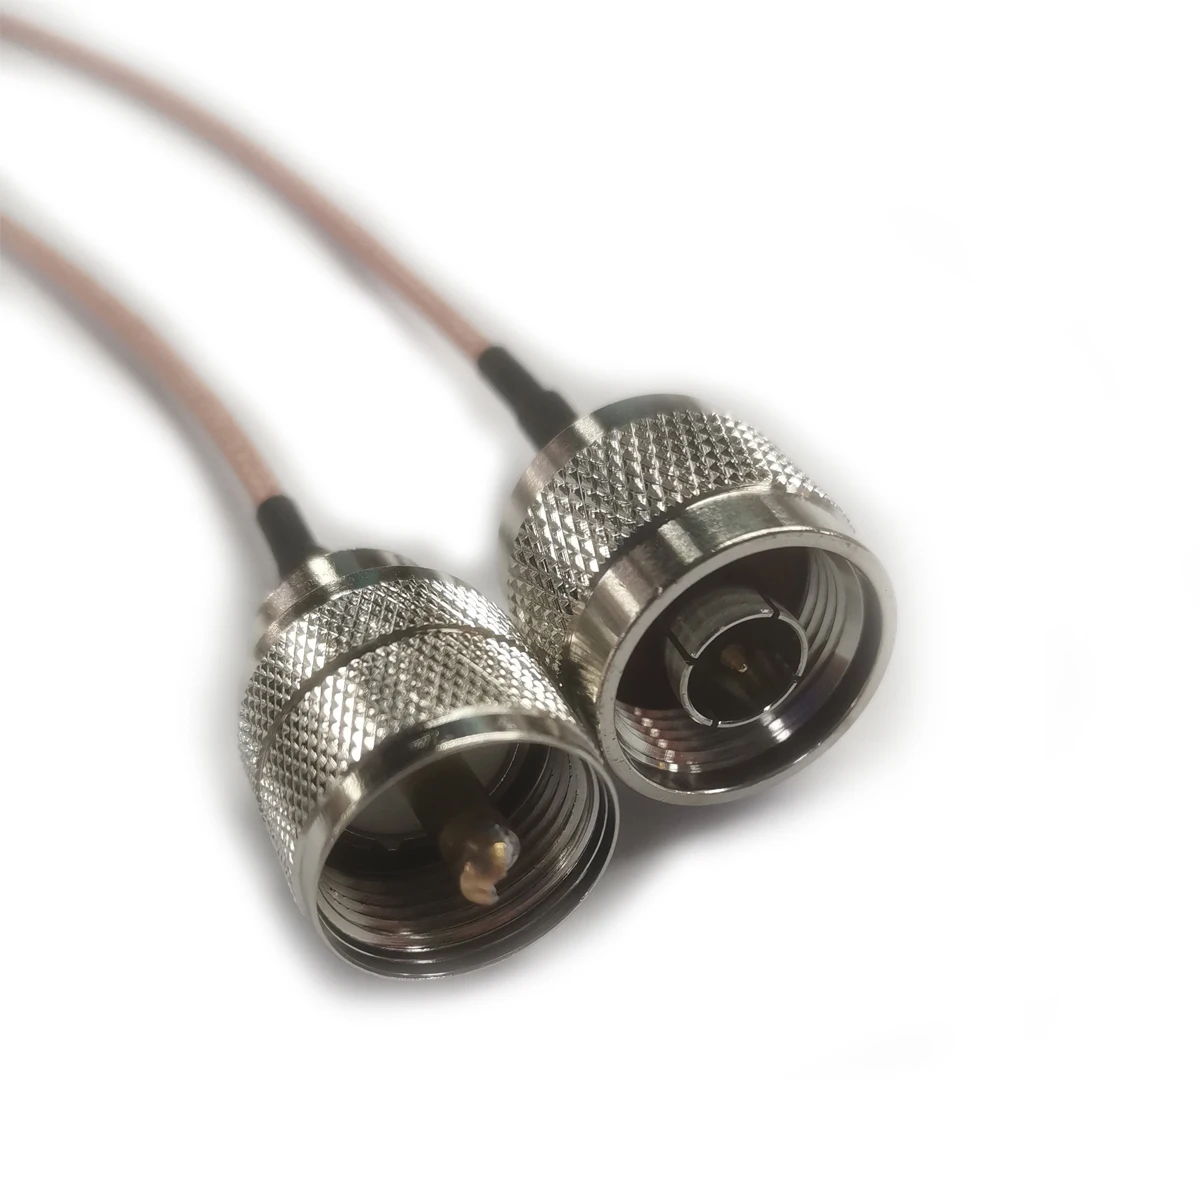 

2PCS/Lot UHF To N-J Male Plug Adapter RF Coaxial Extension Pigtail Cable For Antenna RG316 20cm/30cm/50cm/1meter